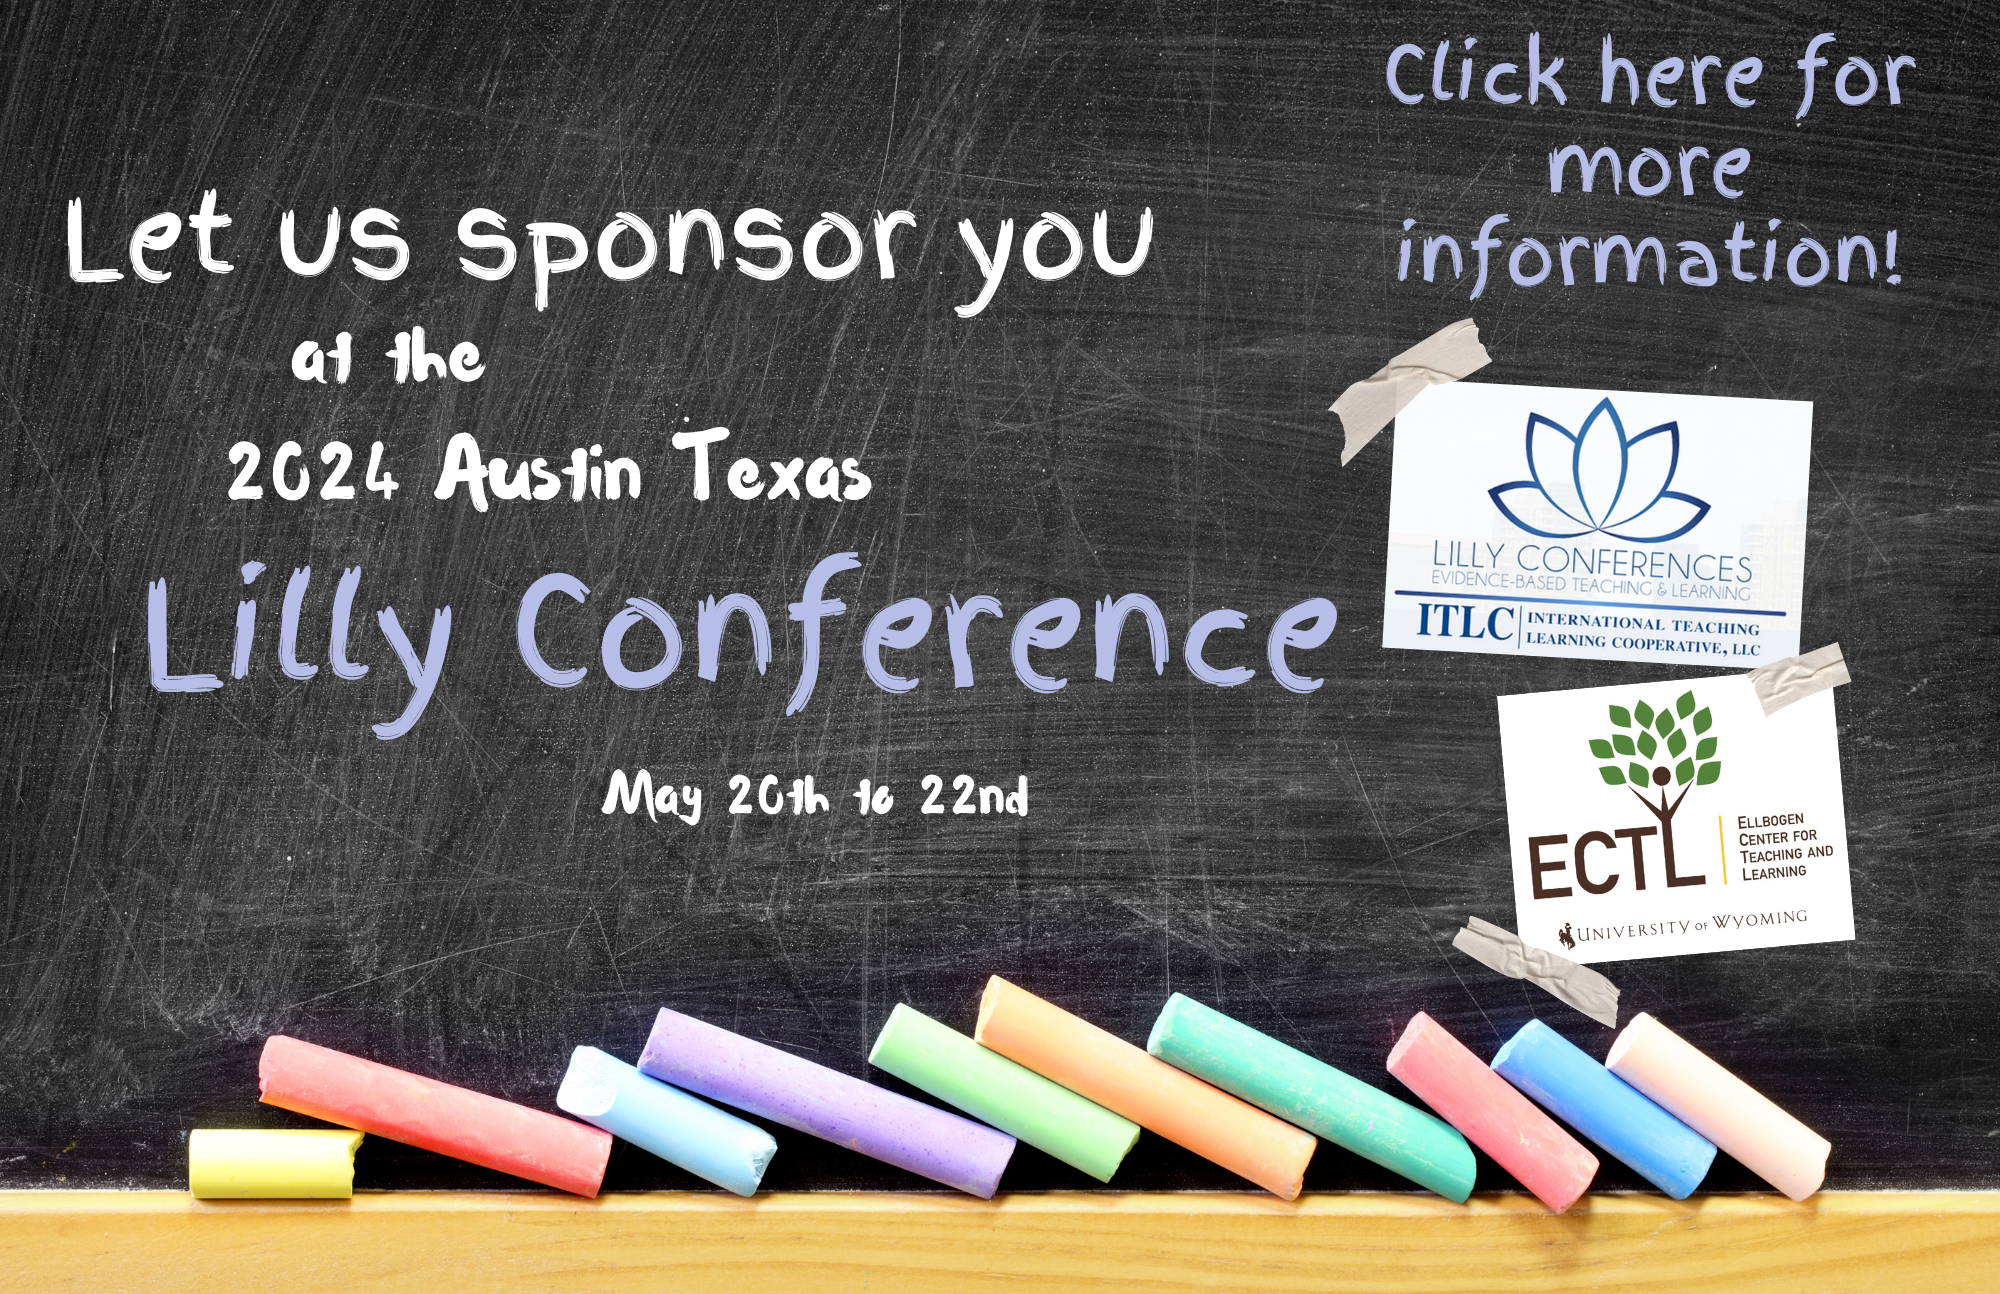 Let us sponsor you at the 2024 austin texas lilly conference from may 20th to the 22nd